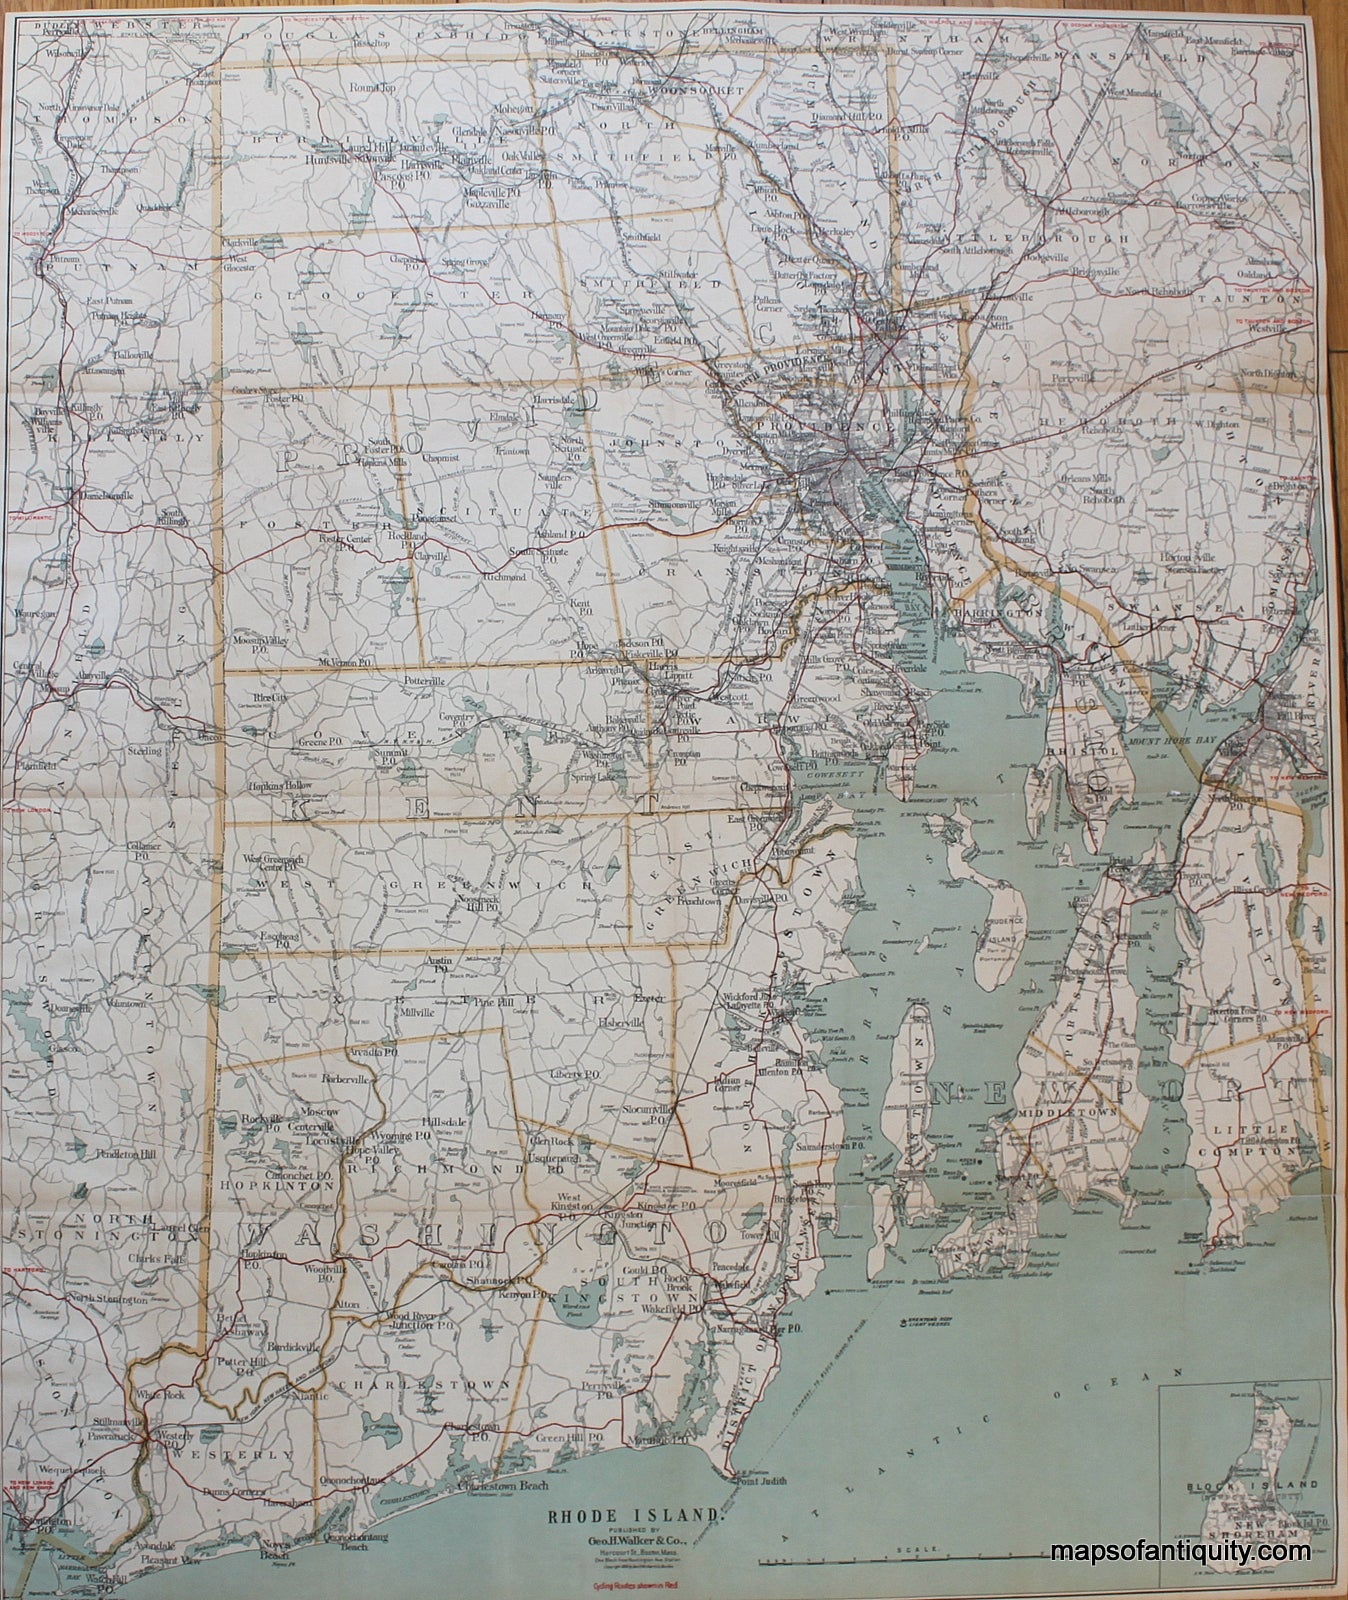 Antique-Road-Map-Cyclists-Road-Map-of-Rhode-Island-showing-All-the-Roads-and-Points-of-Interest***********-Rhode-Island-Road-Maps-1898-Walker-Maps-Of-Antiquity